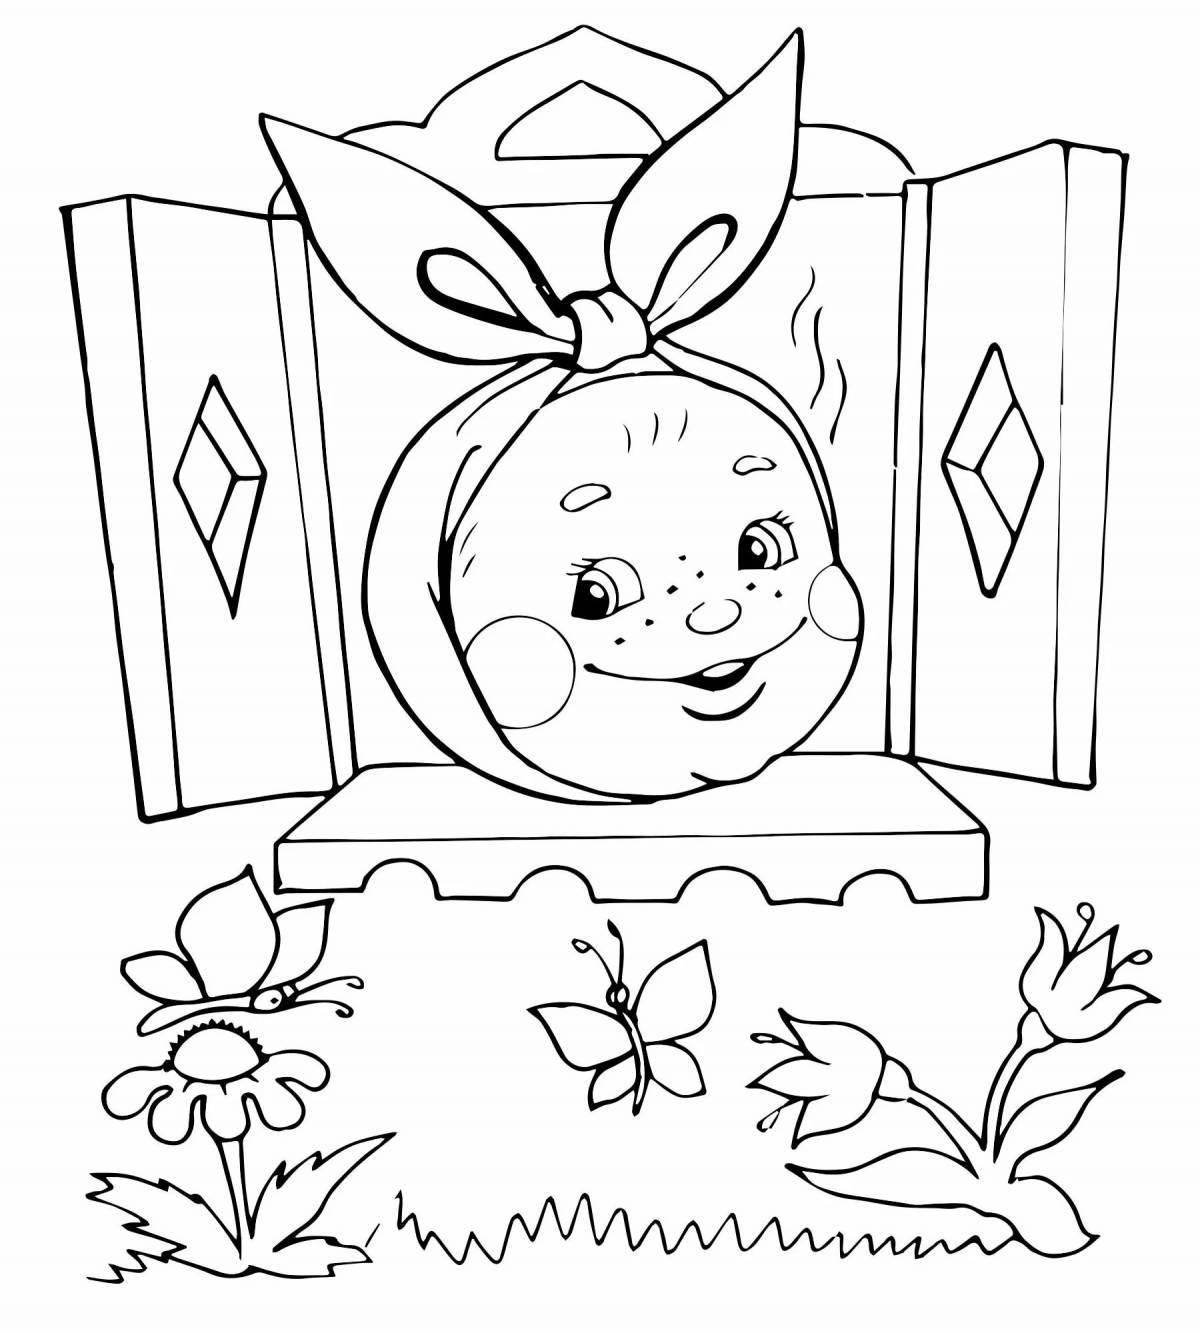 Great coloring book visiting a fairy tale